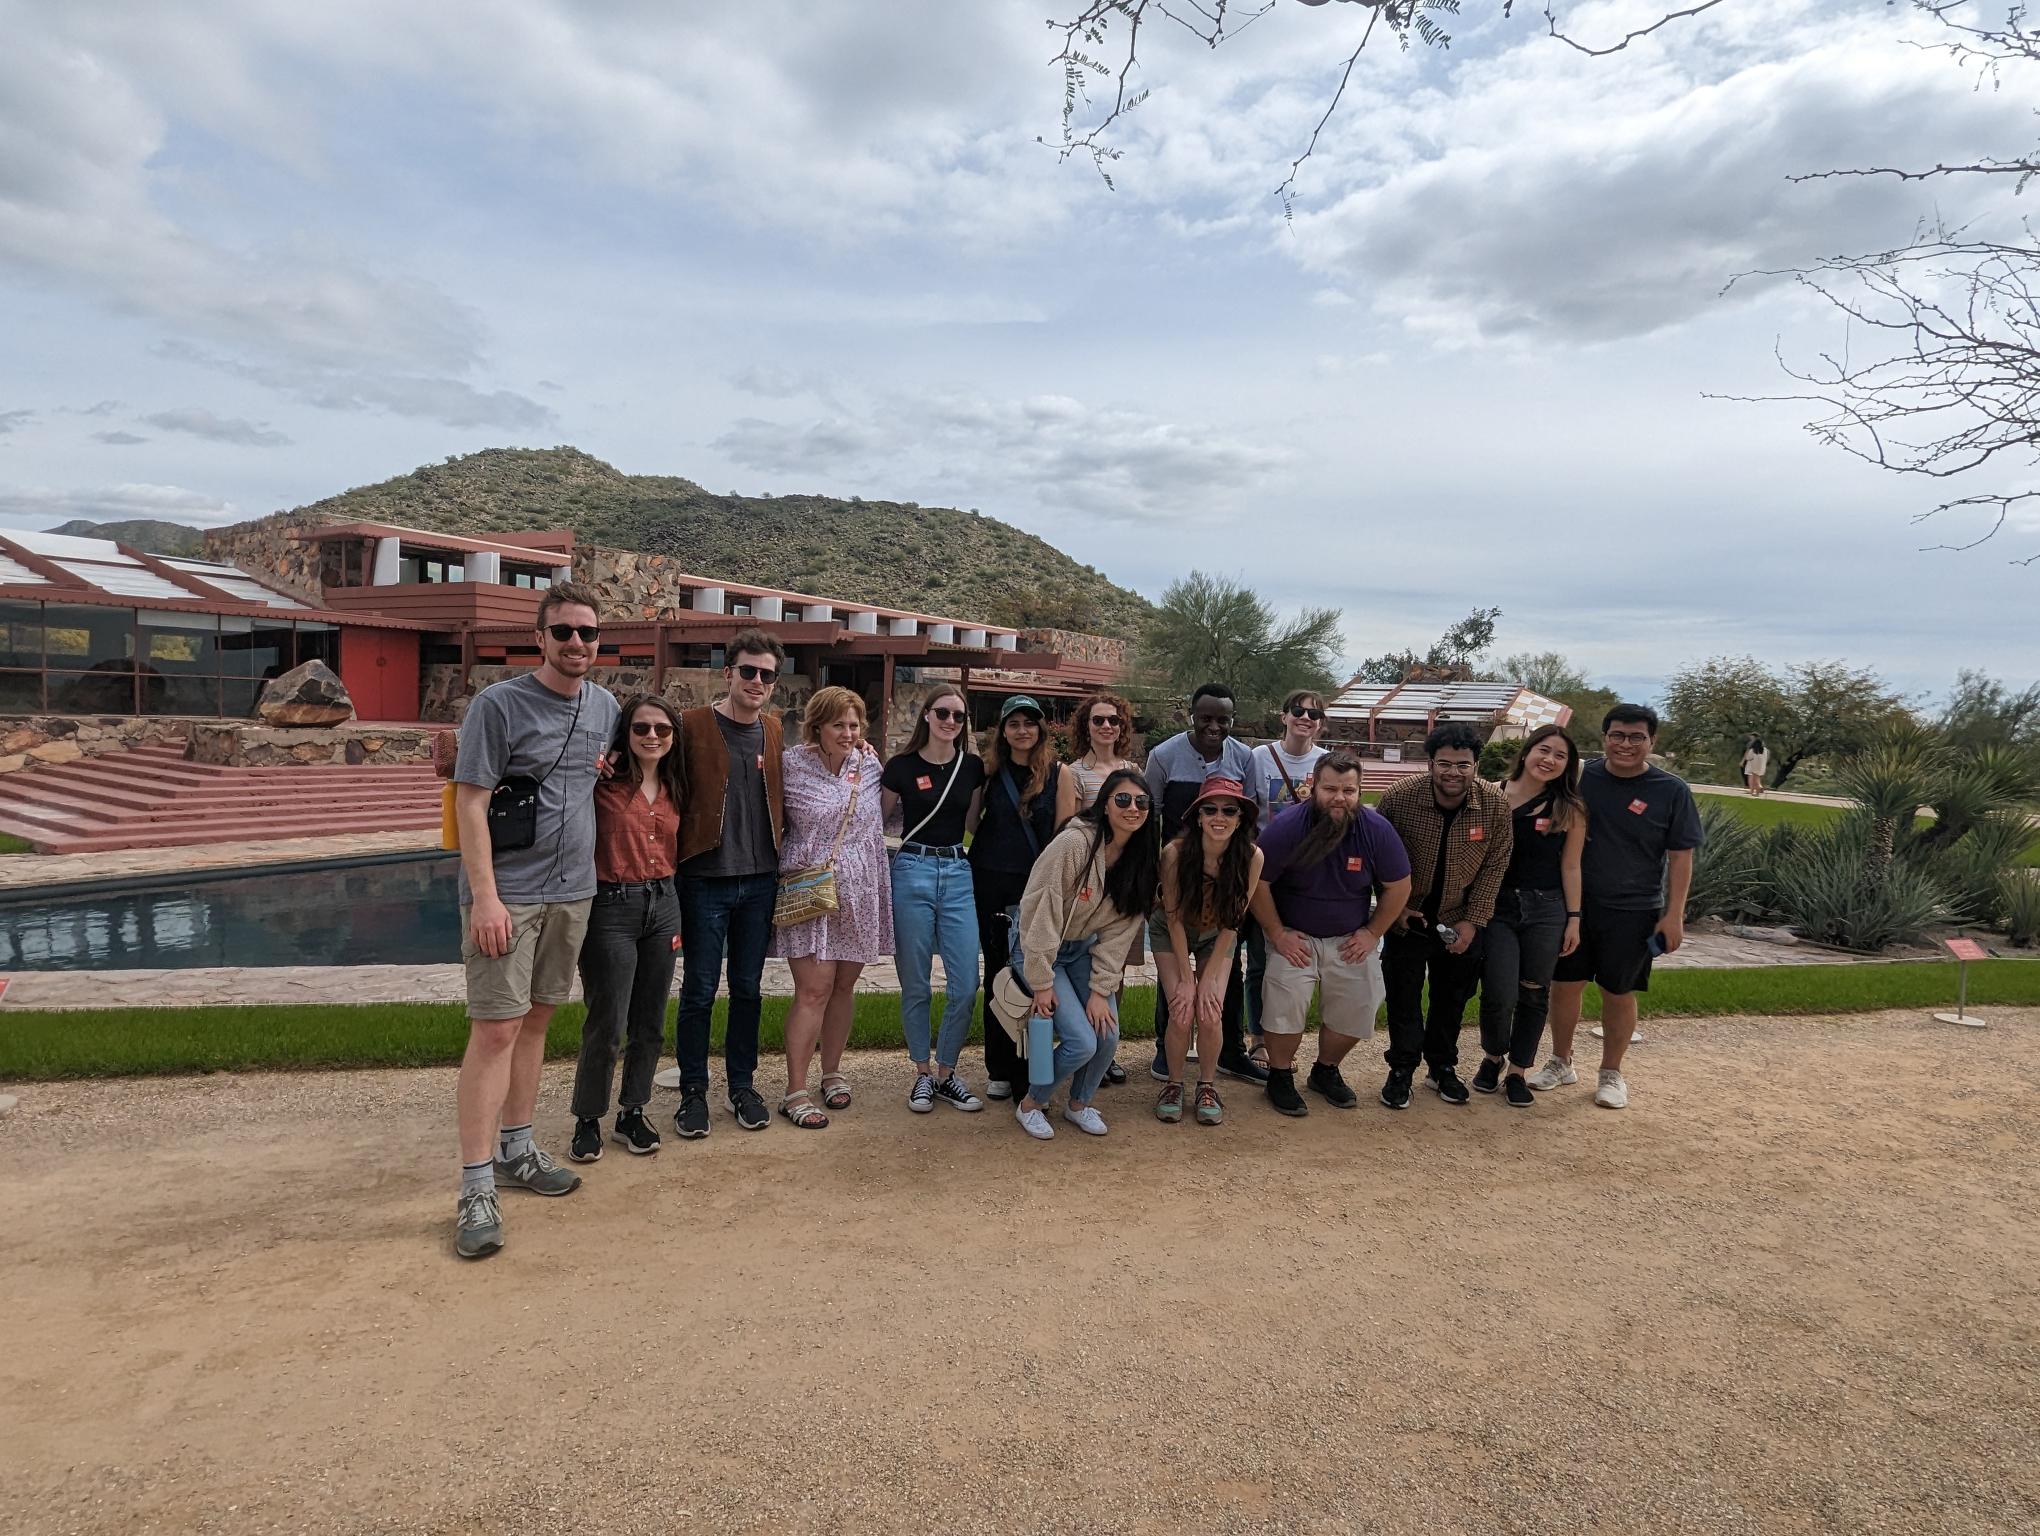 Group photo in front of a Frank Lloyd Wright building.